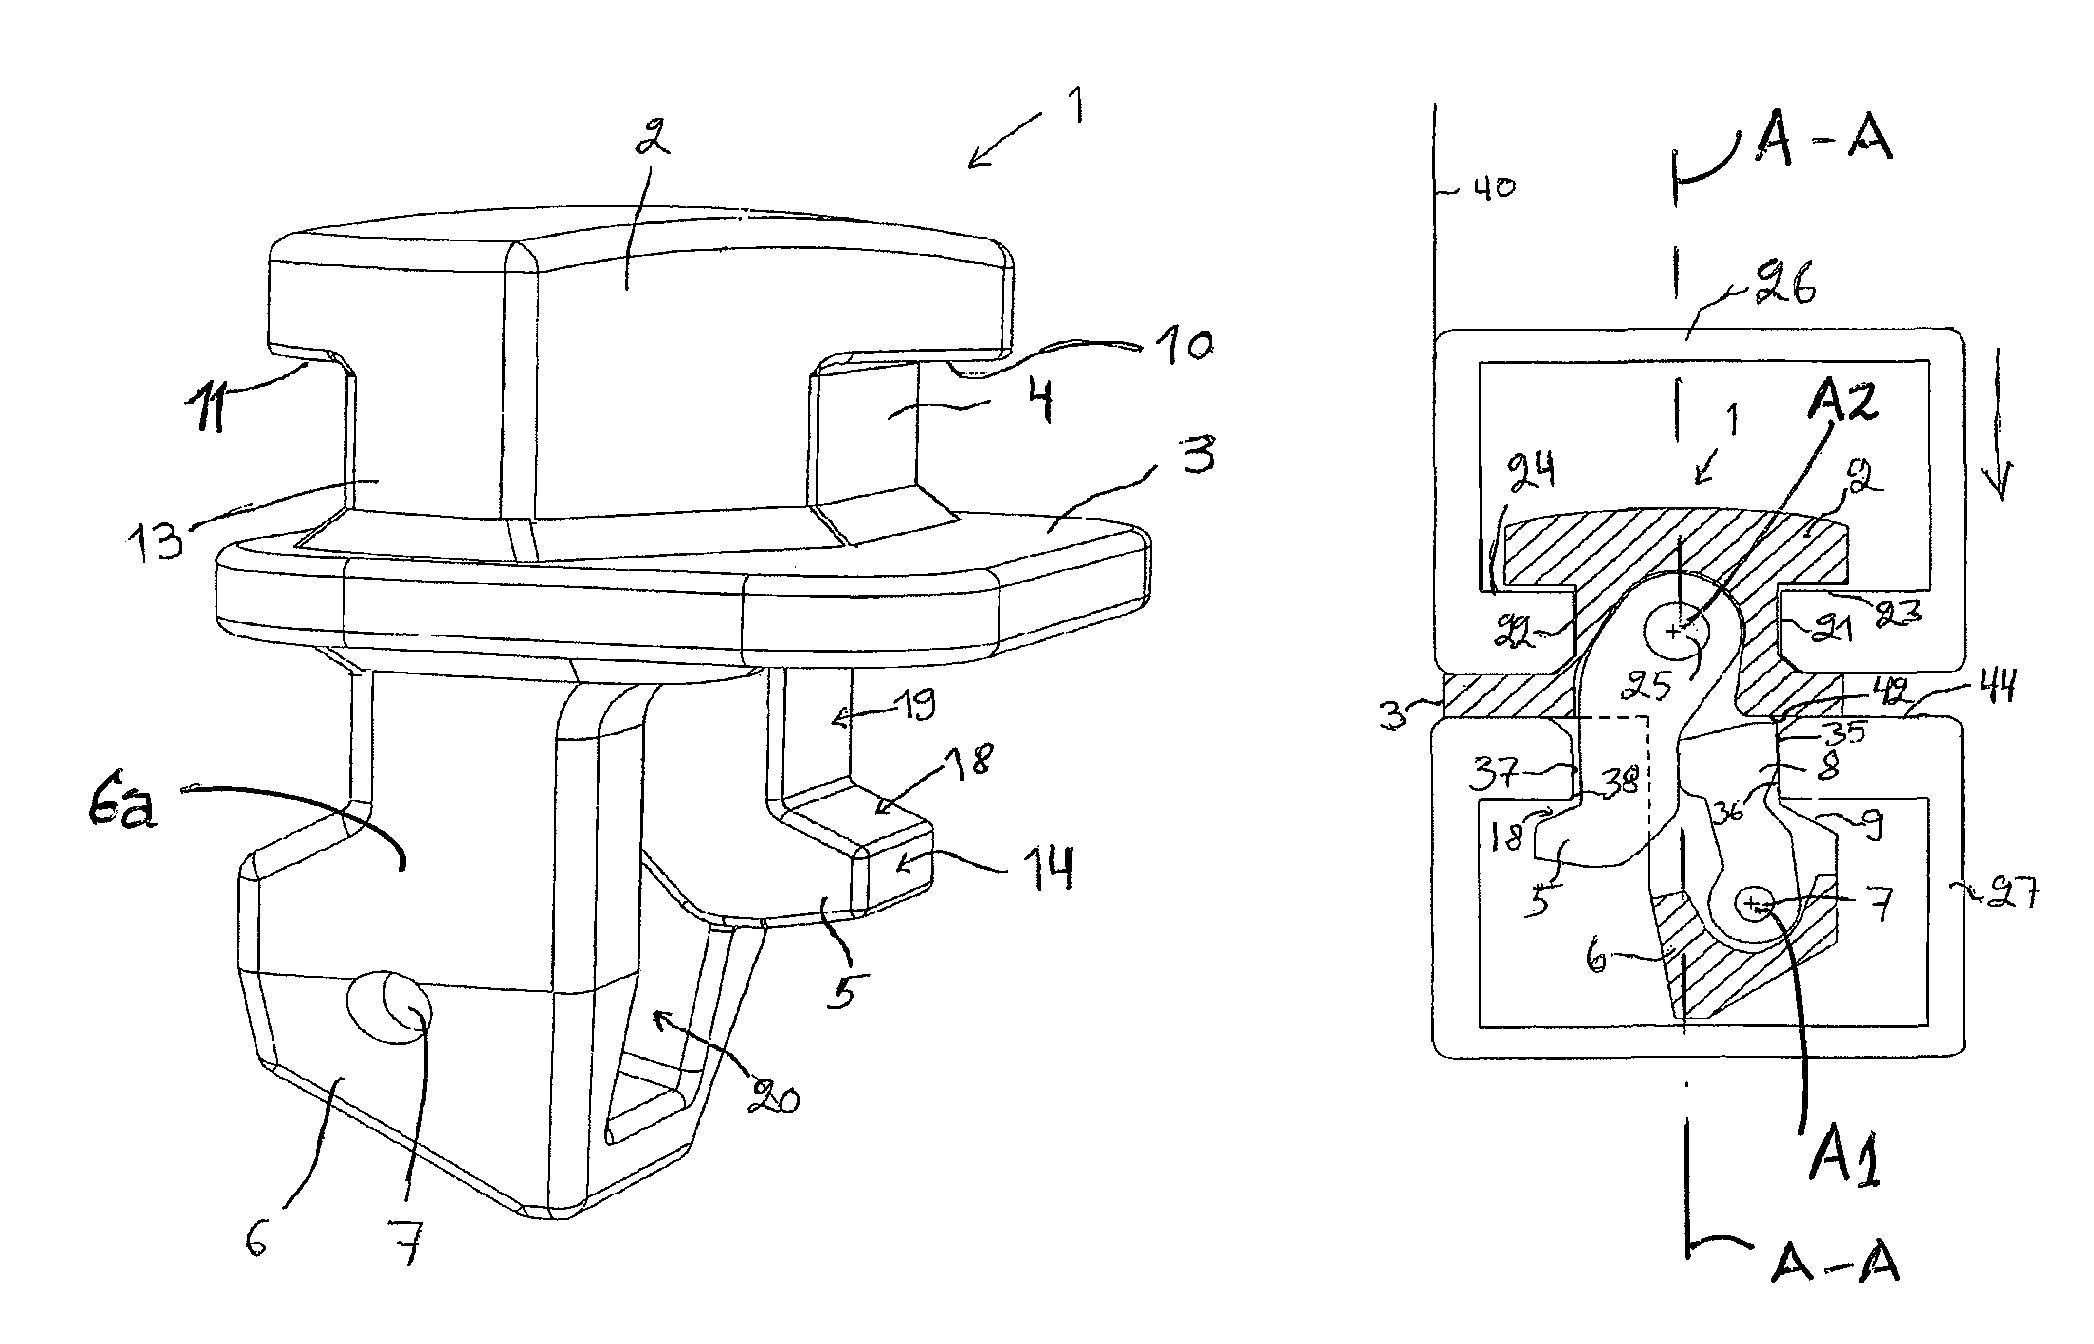 Coupling device for coupling containers, particularly containers used in cargo ships